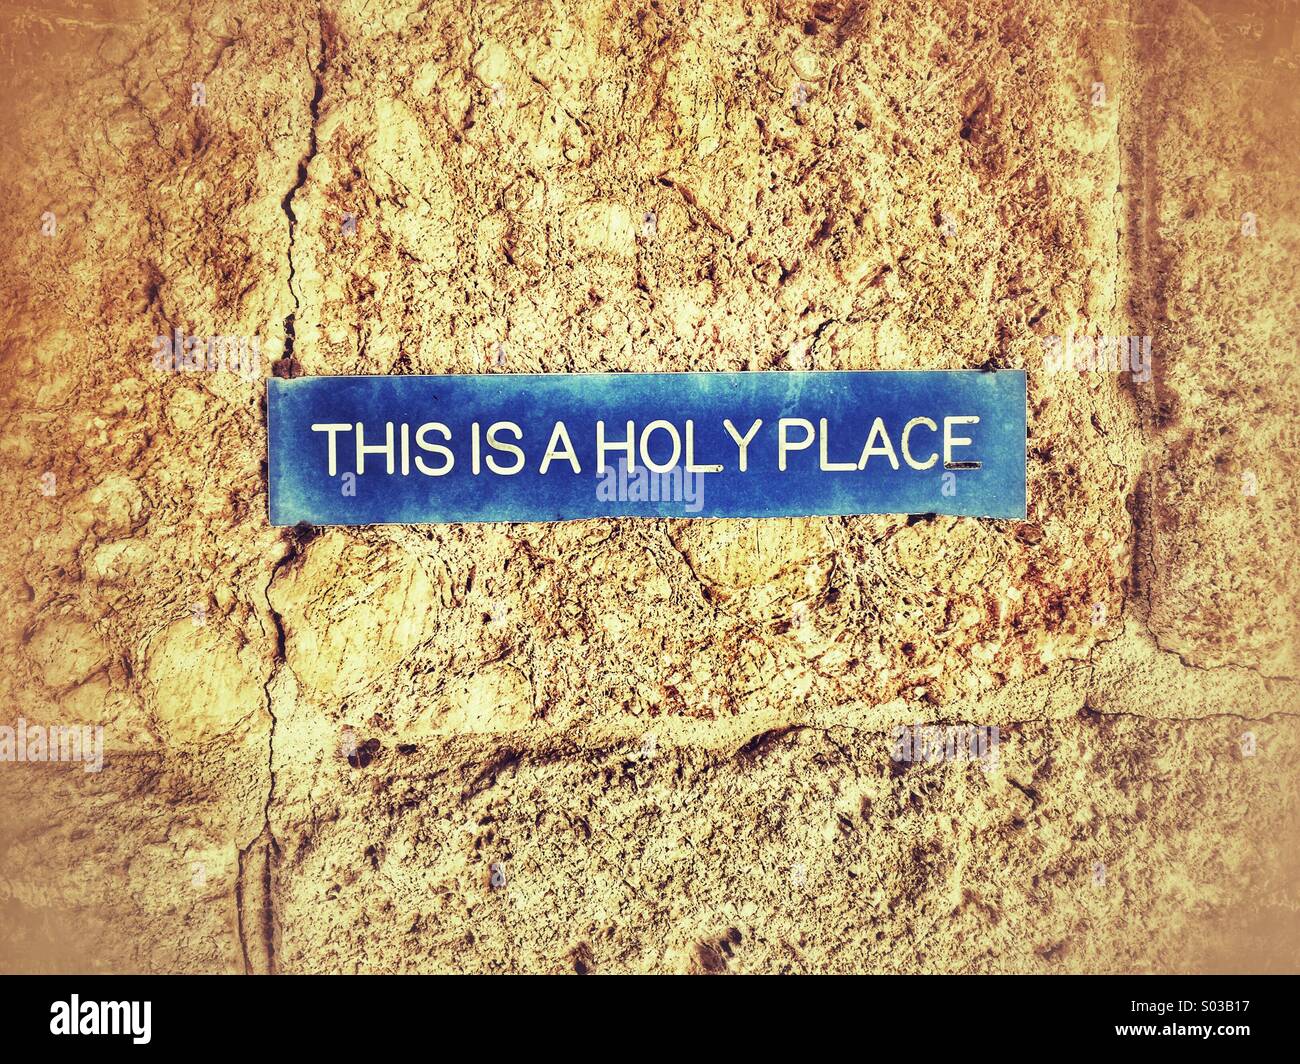 This is a Holy Place sign Stock Photo